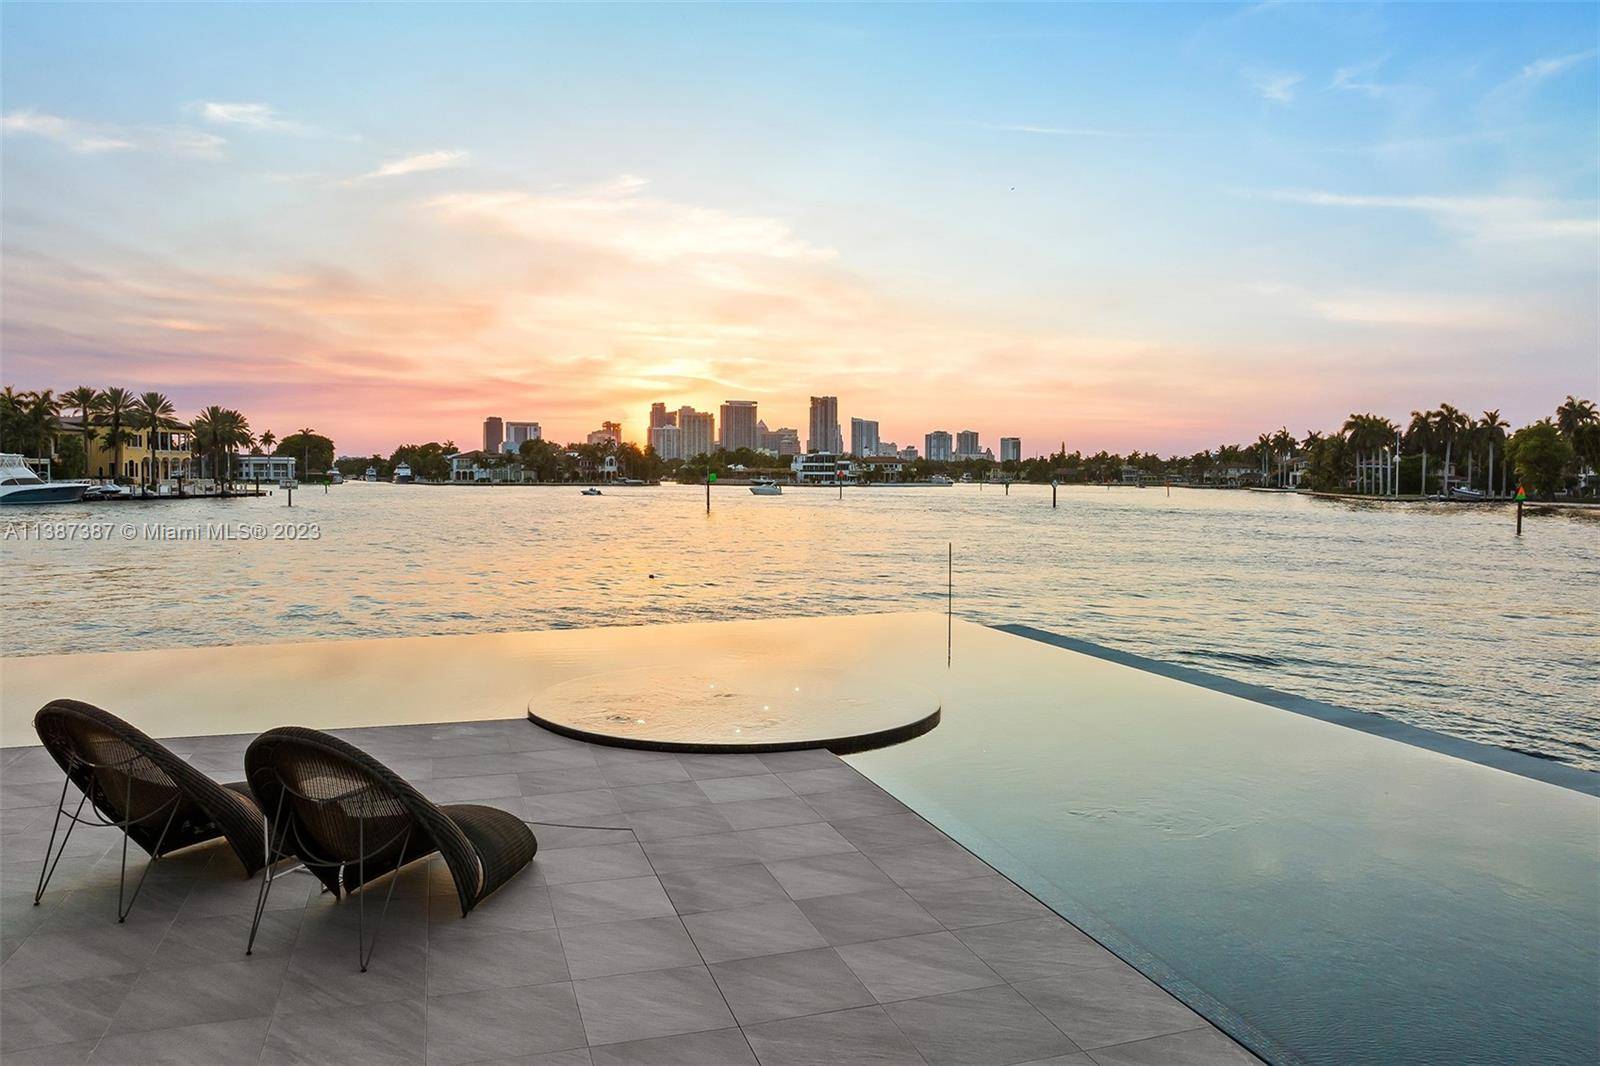 Fort Lauderdale's Premier Waterfront location boasting 1035 linear feet of waterfront situated at the intersection of the intracoastal and the New River.